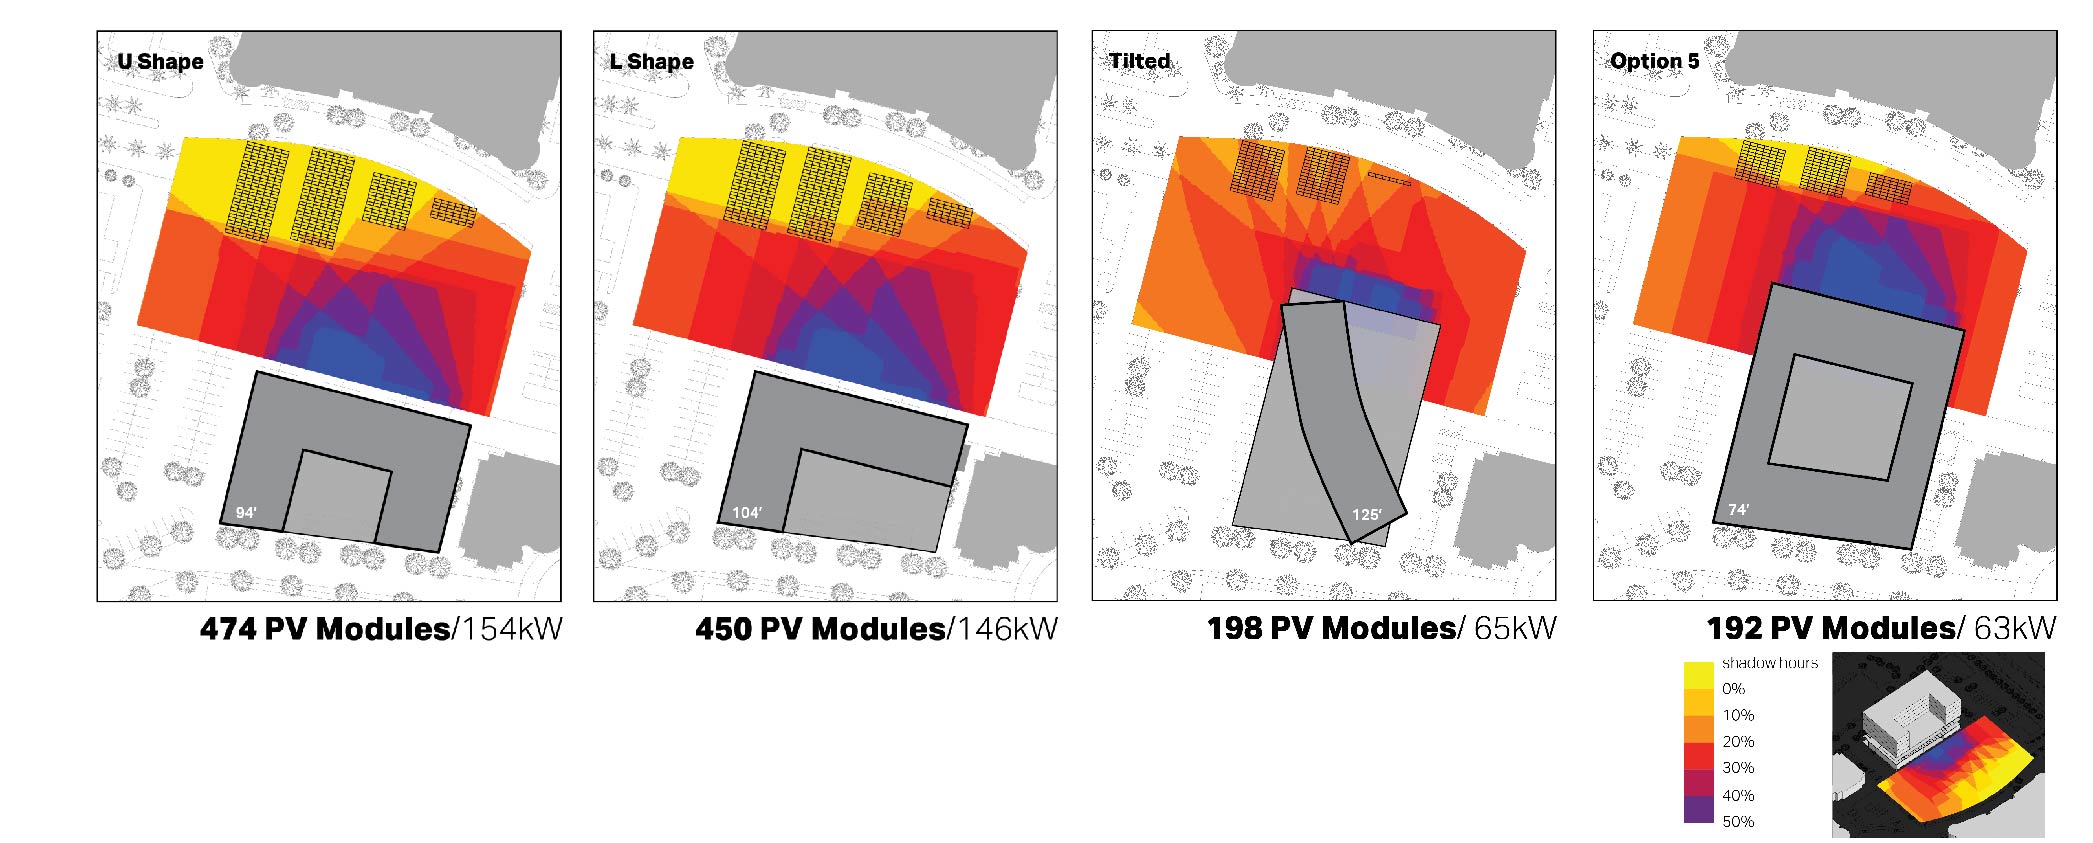 What is the impact of massing on solar PV output and module layout?